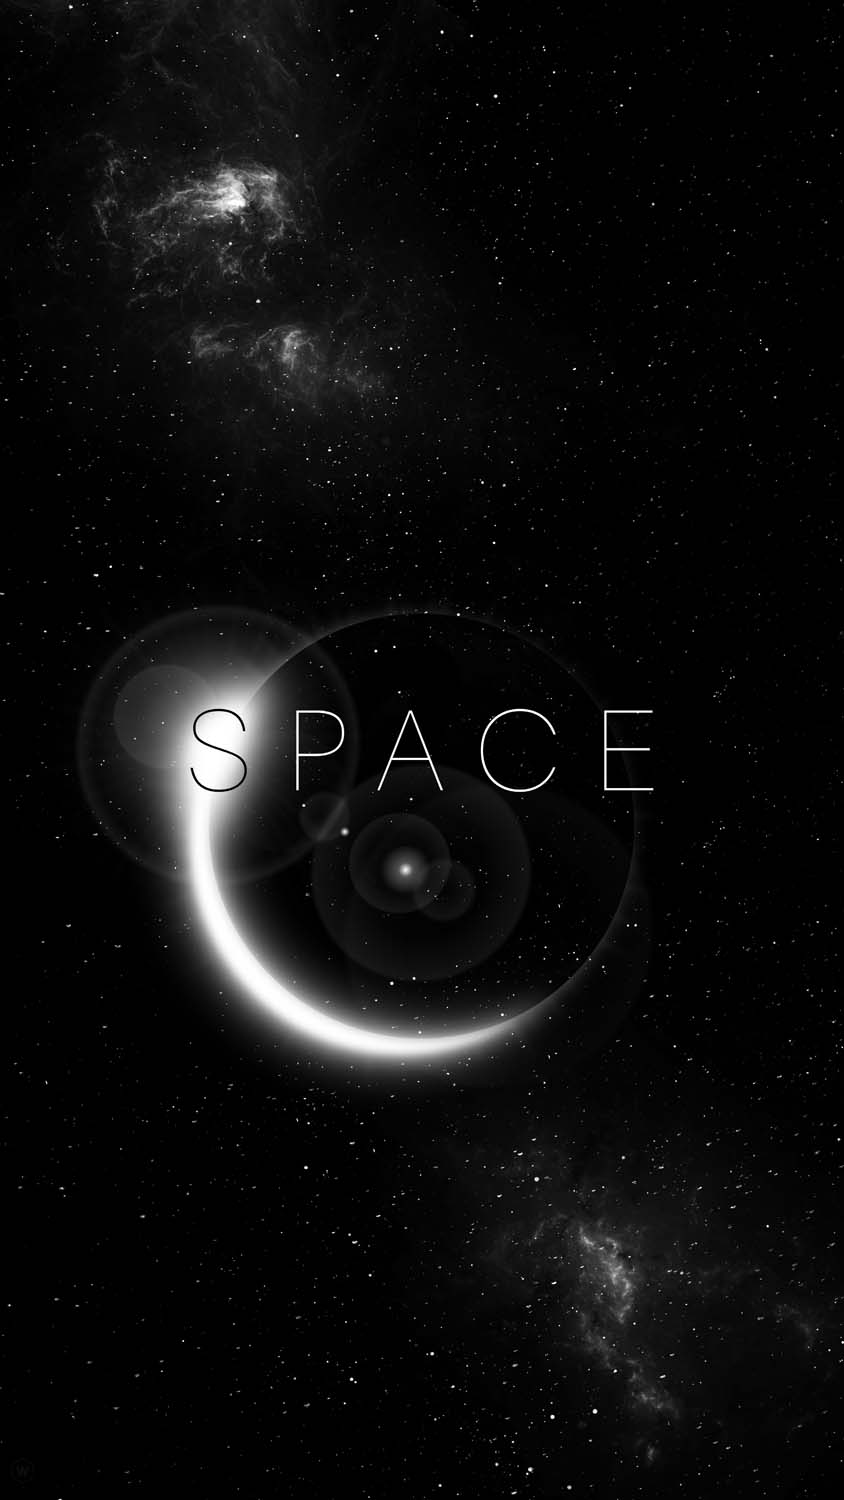 Space iPhone Wallpaper HD